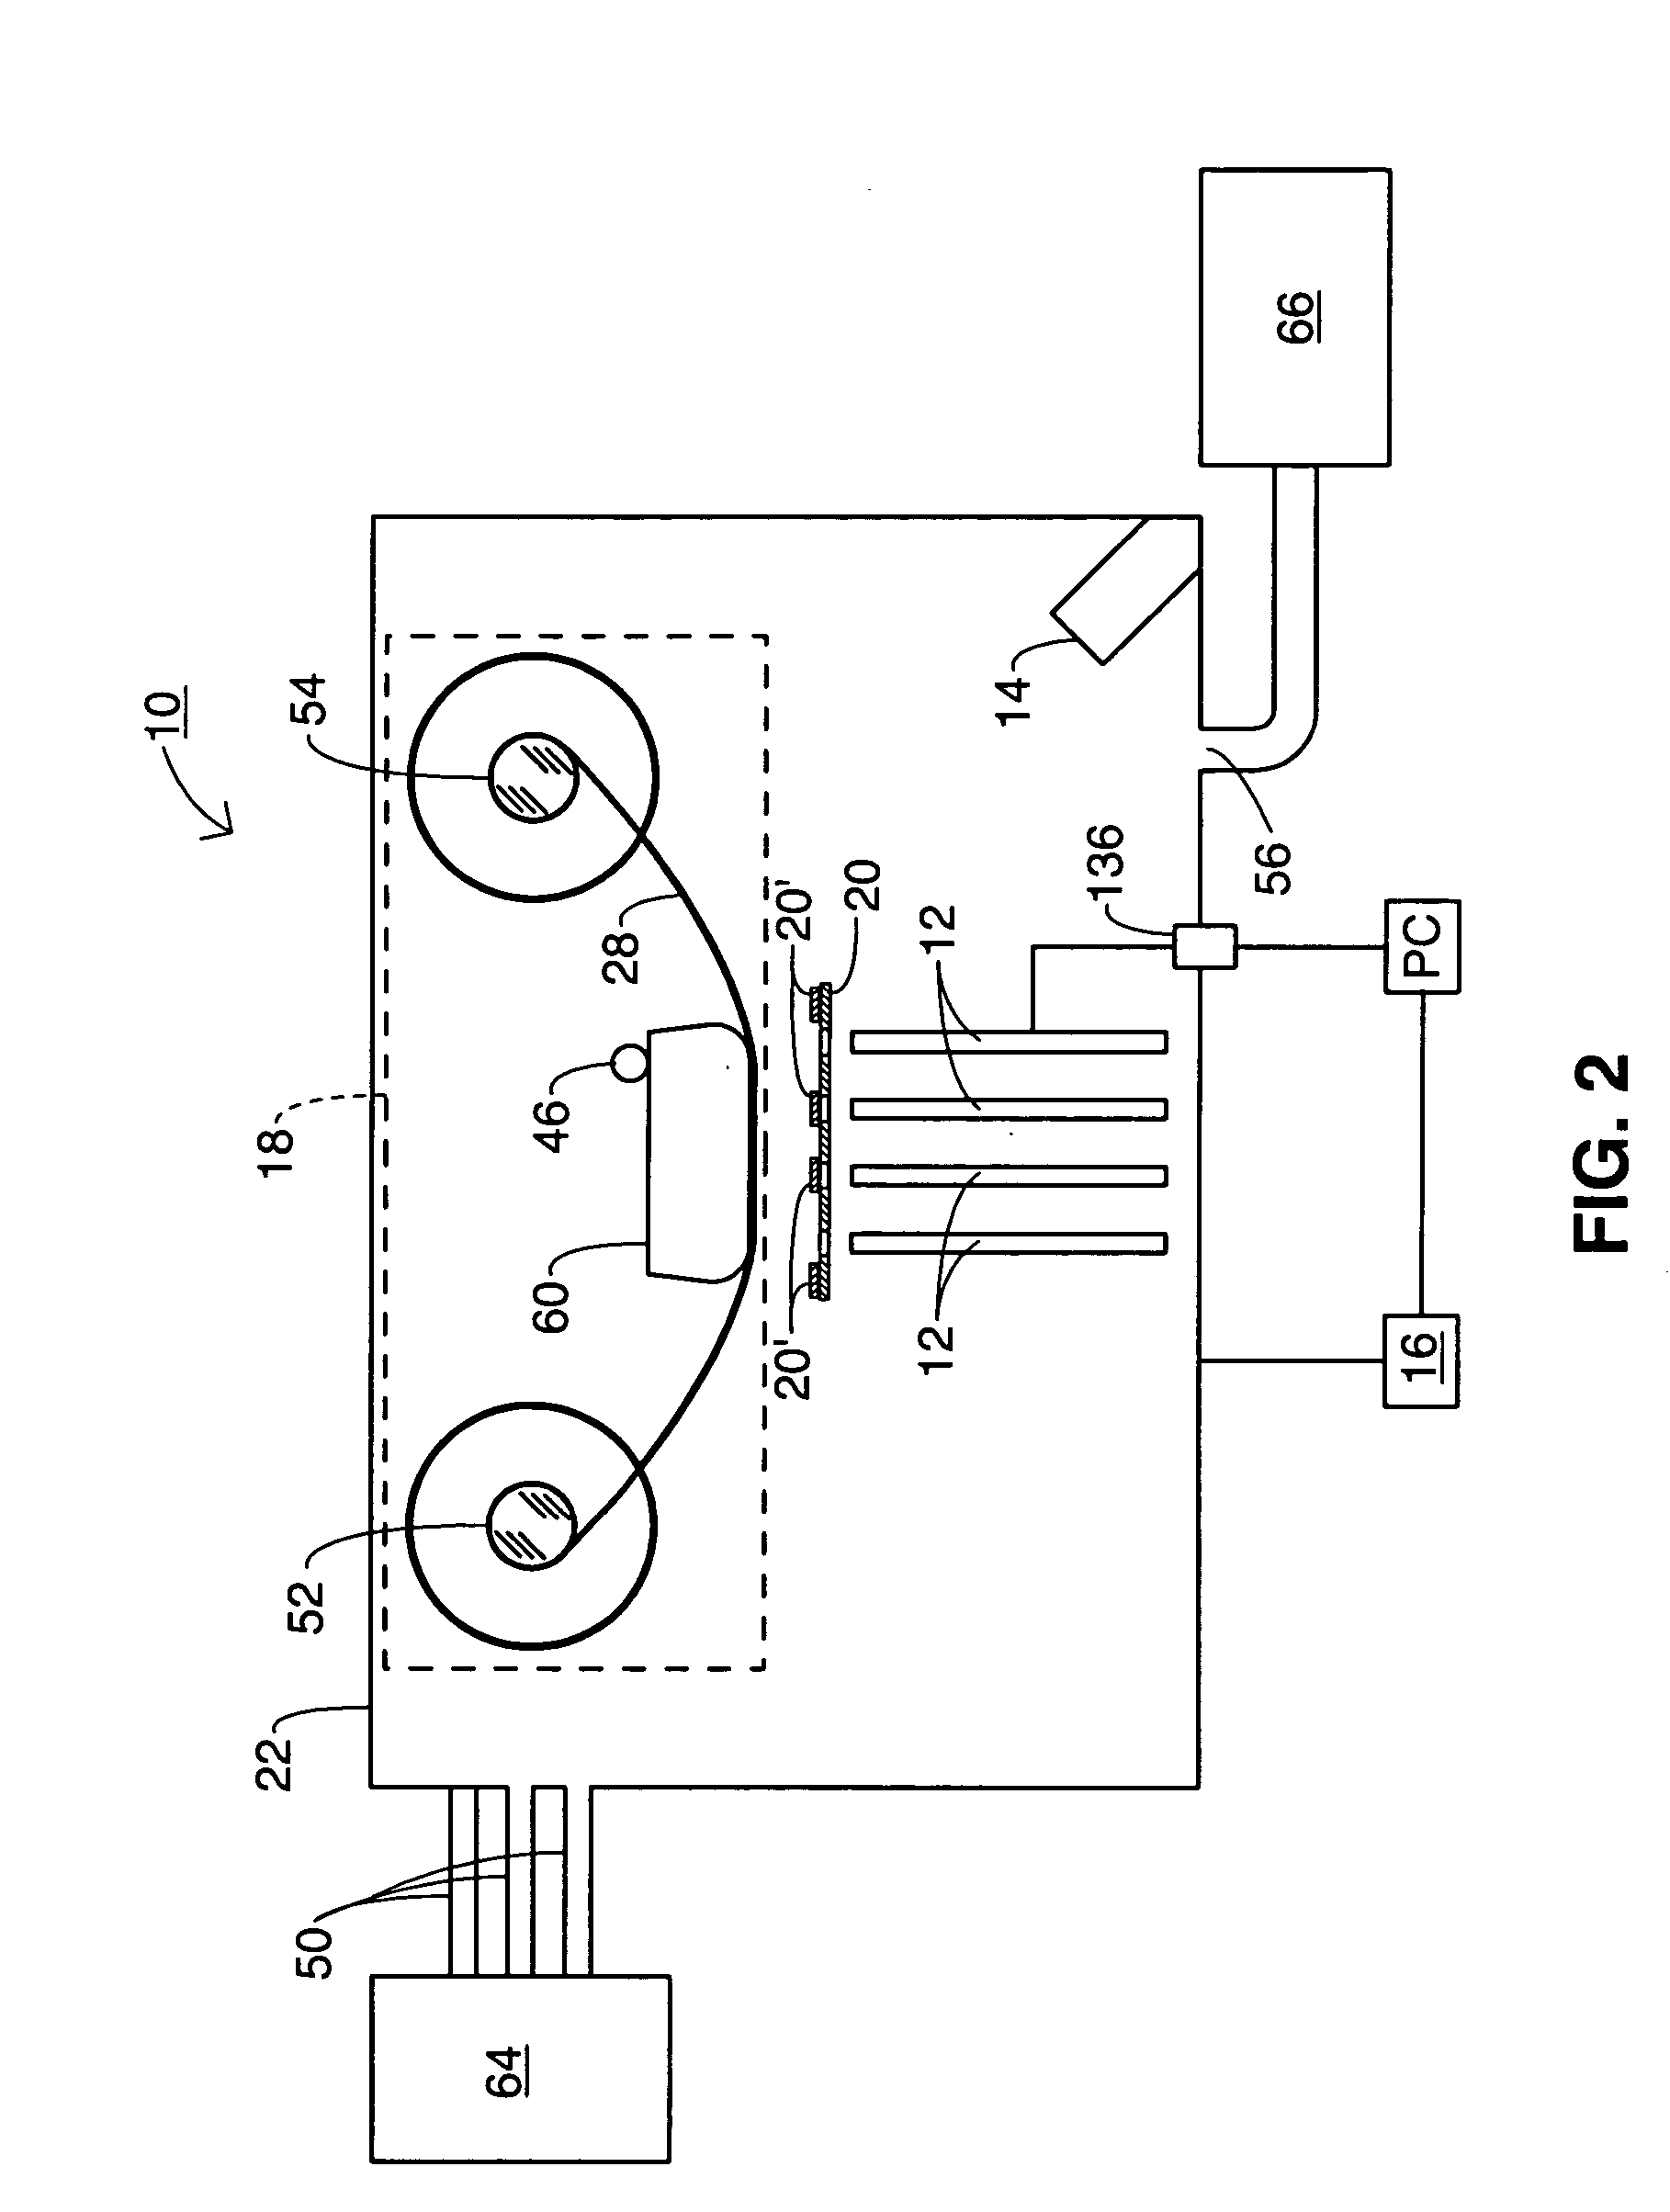 Tape-manufacturing system having extended operational capabilites